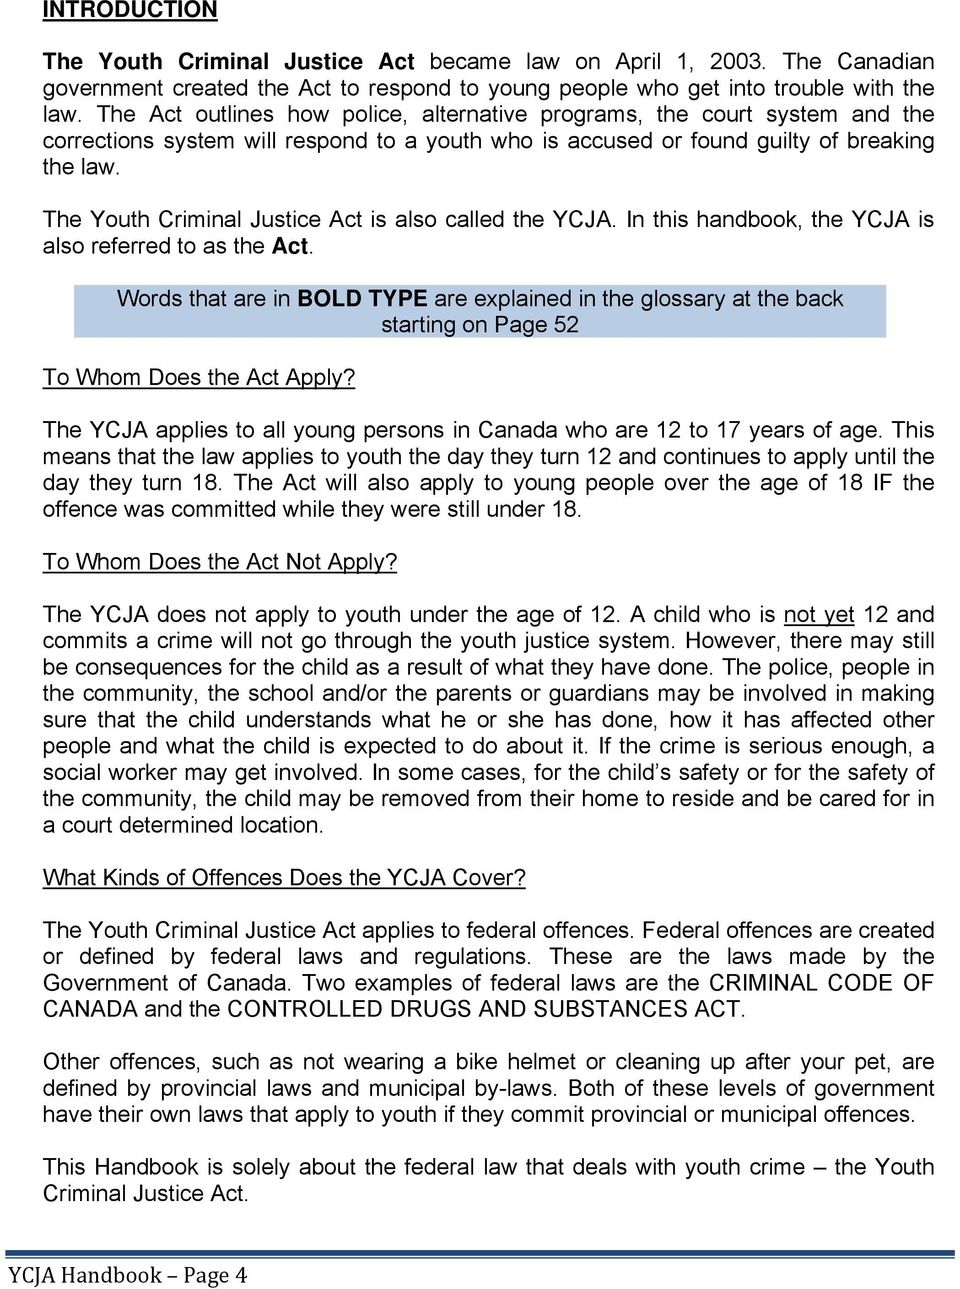 The Youth Criminal Justice Act is also called the YCJA. In this handbook, the YCJA is also referred to as the Act.